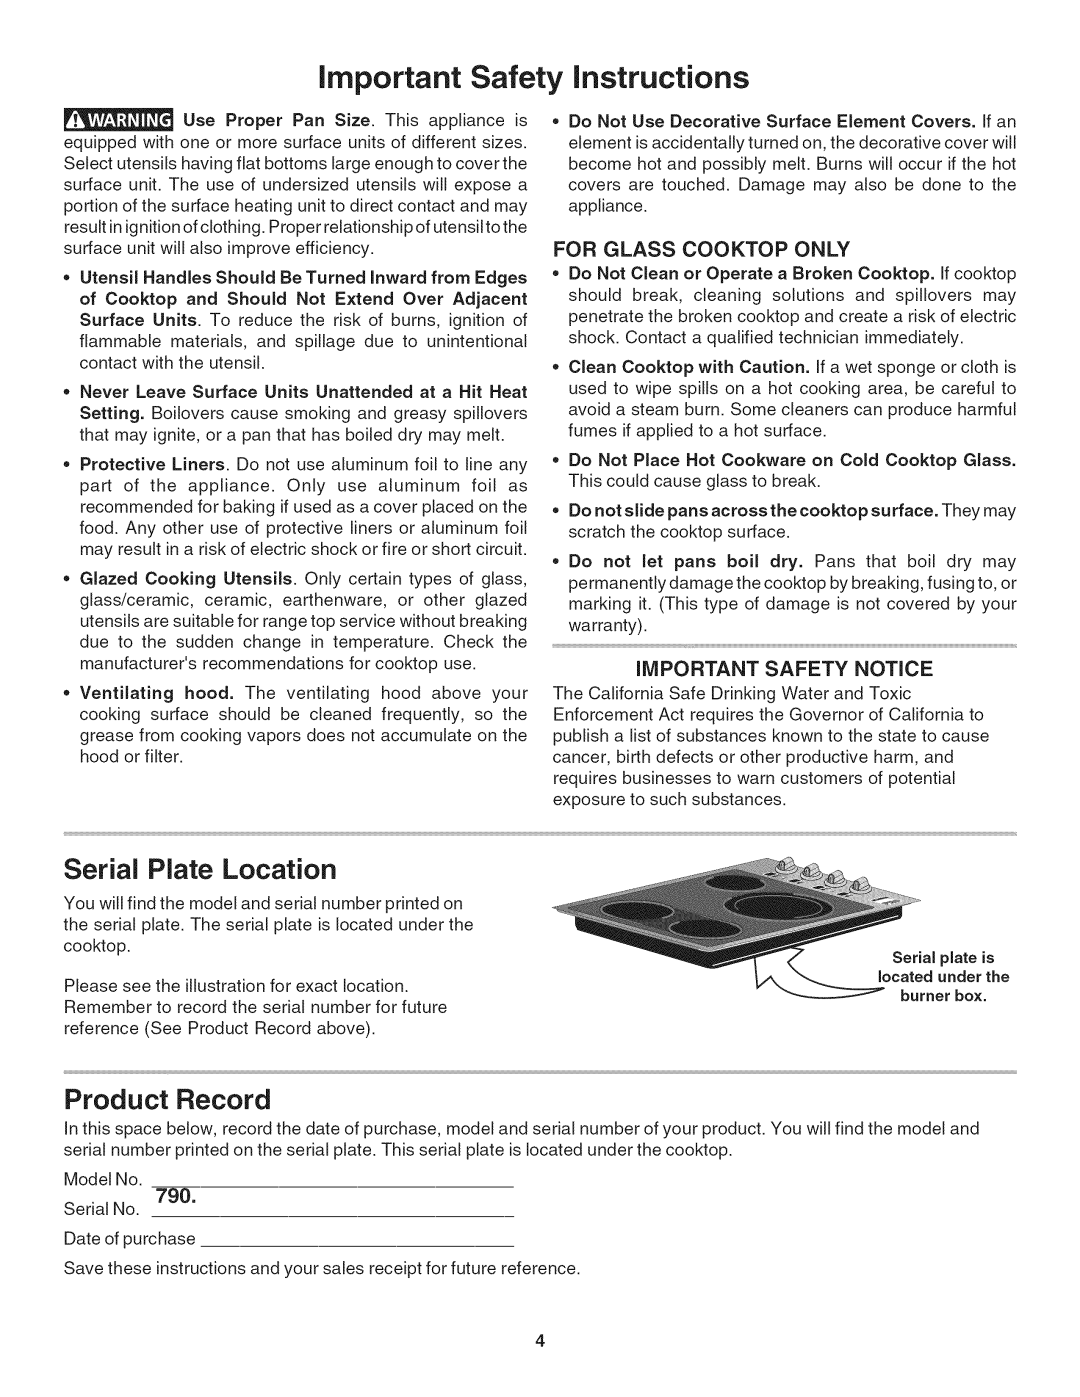 Kenmore 790.4056, 790.4055 Serial Plate Location, Product Record, important Safety instructions, For Glass Cooktop Only 